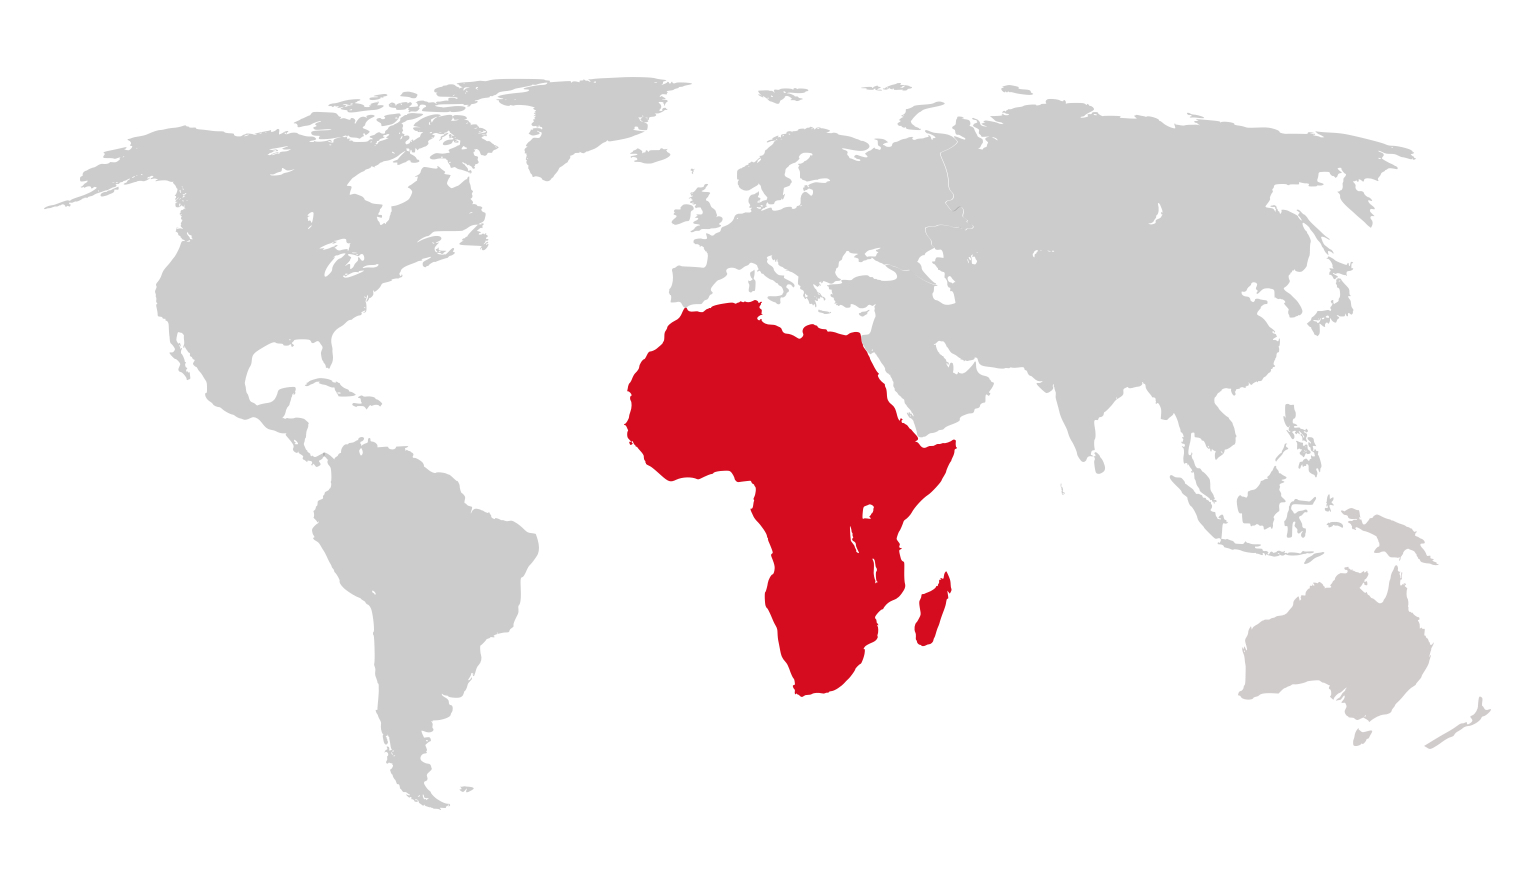 World map with Africa highlighted